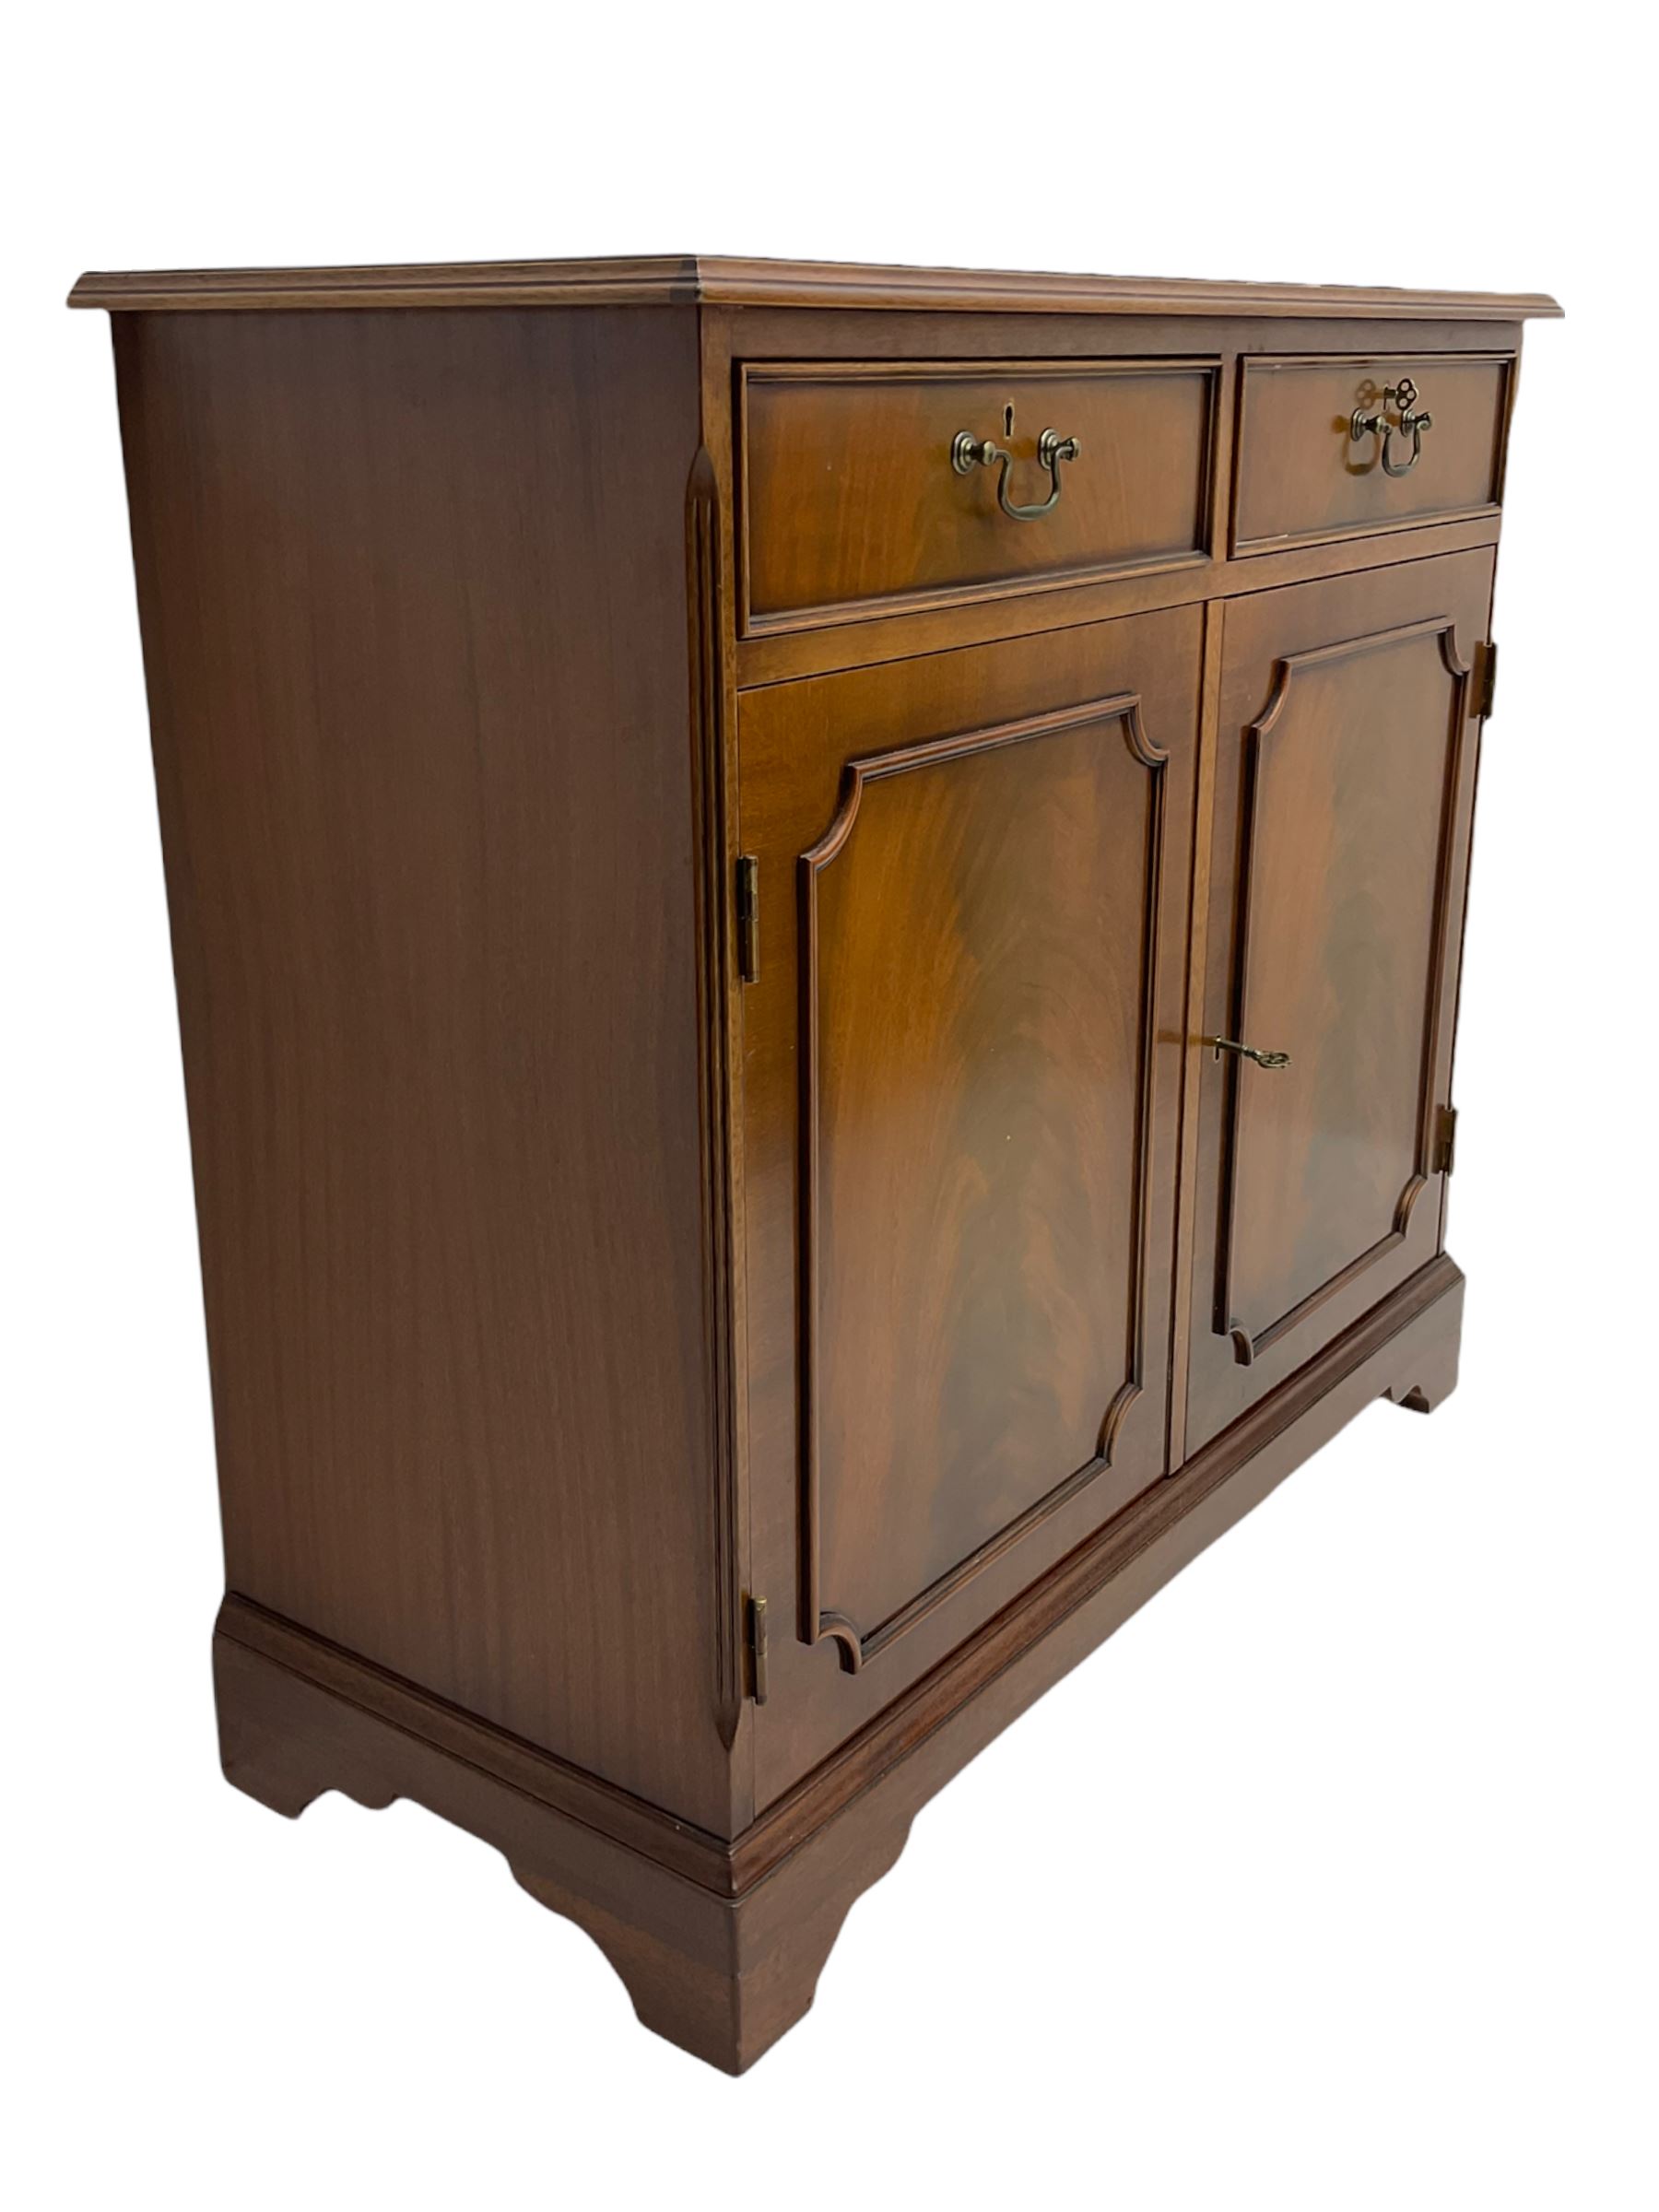 Reproduction mahogany side cabinet - Image 5 of 6